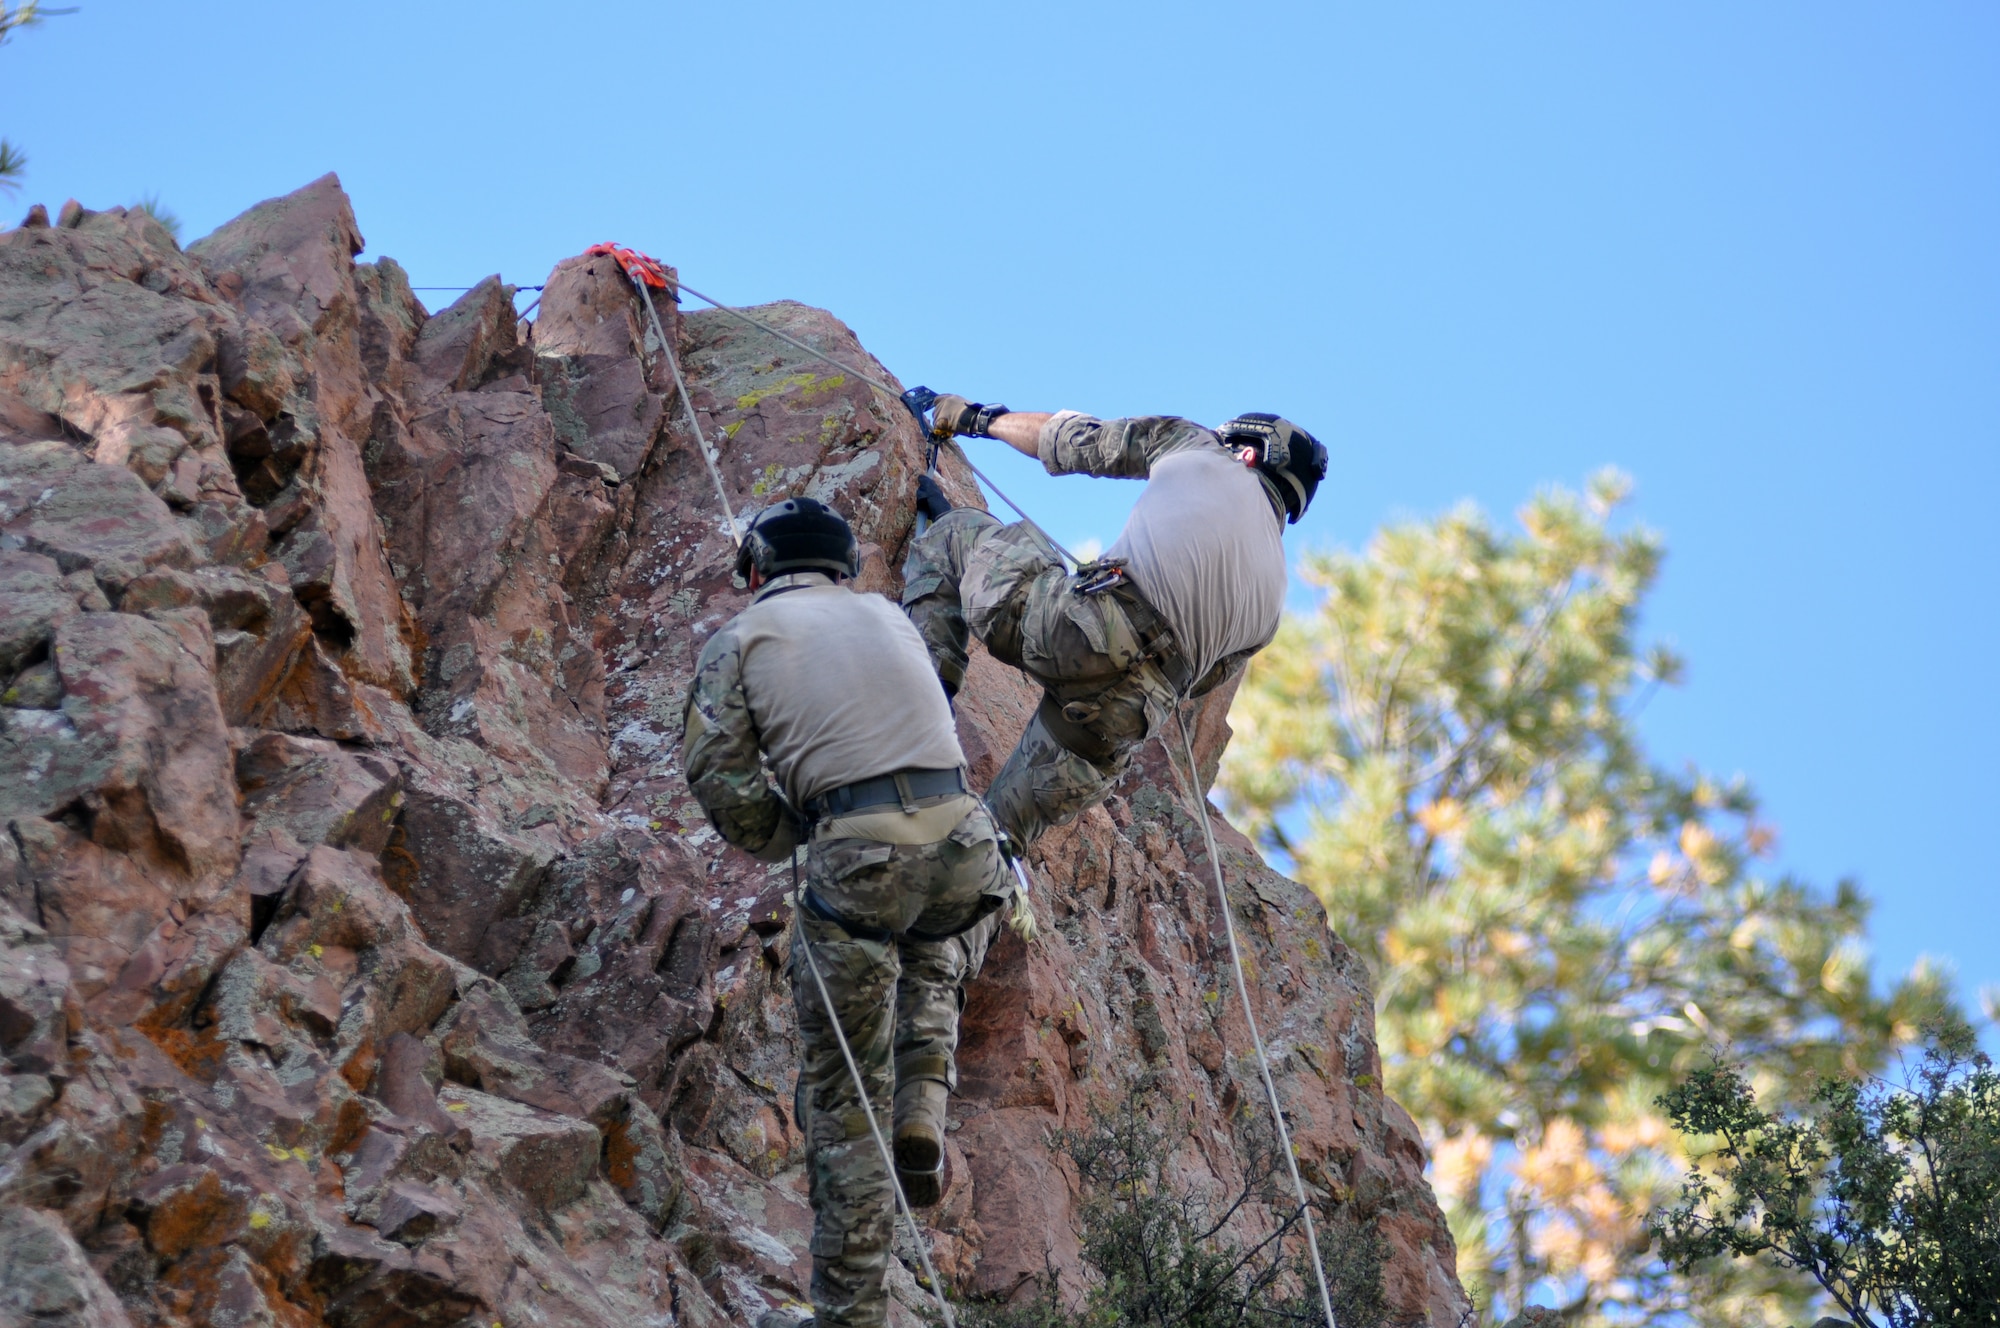 Two pararescuemen ascend from an 80-foot vertical cliff during the 2014 Guardian Angel Rodeo, Grants, New Mexico, September 23, 2014. The rodeo, or competition, was a week-long event that tested the PJs on land navigation skills, high-angel rope rescues, survival techniques, medical skills, weapons operations and overall physical endurance. (U.S. Air Force photo/ Tech. Sgt. Katie Spencer)  